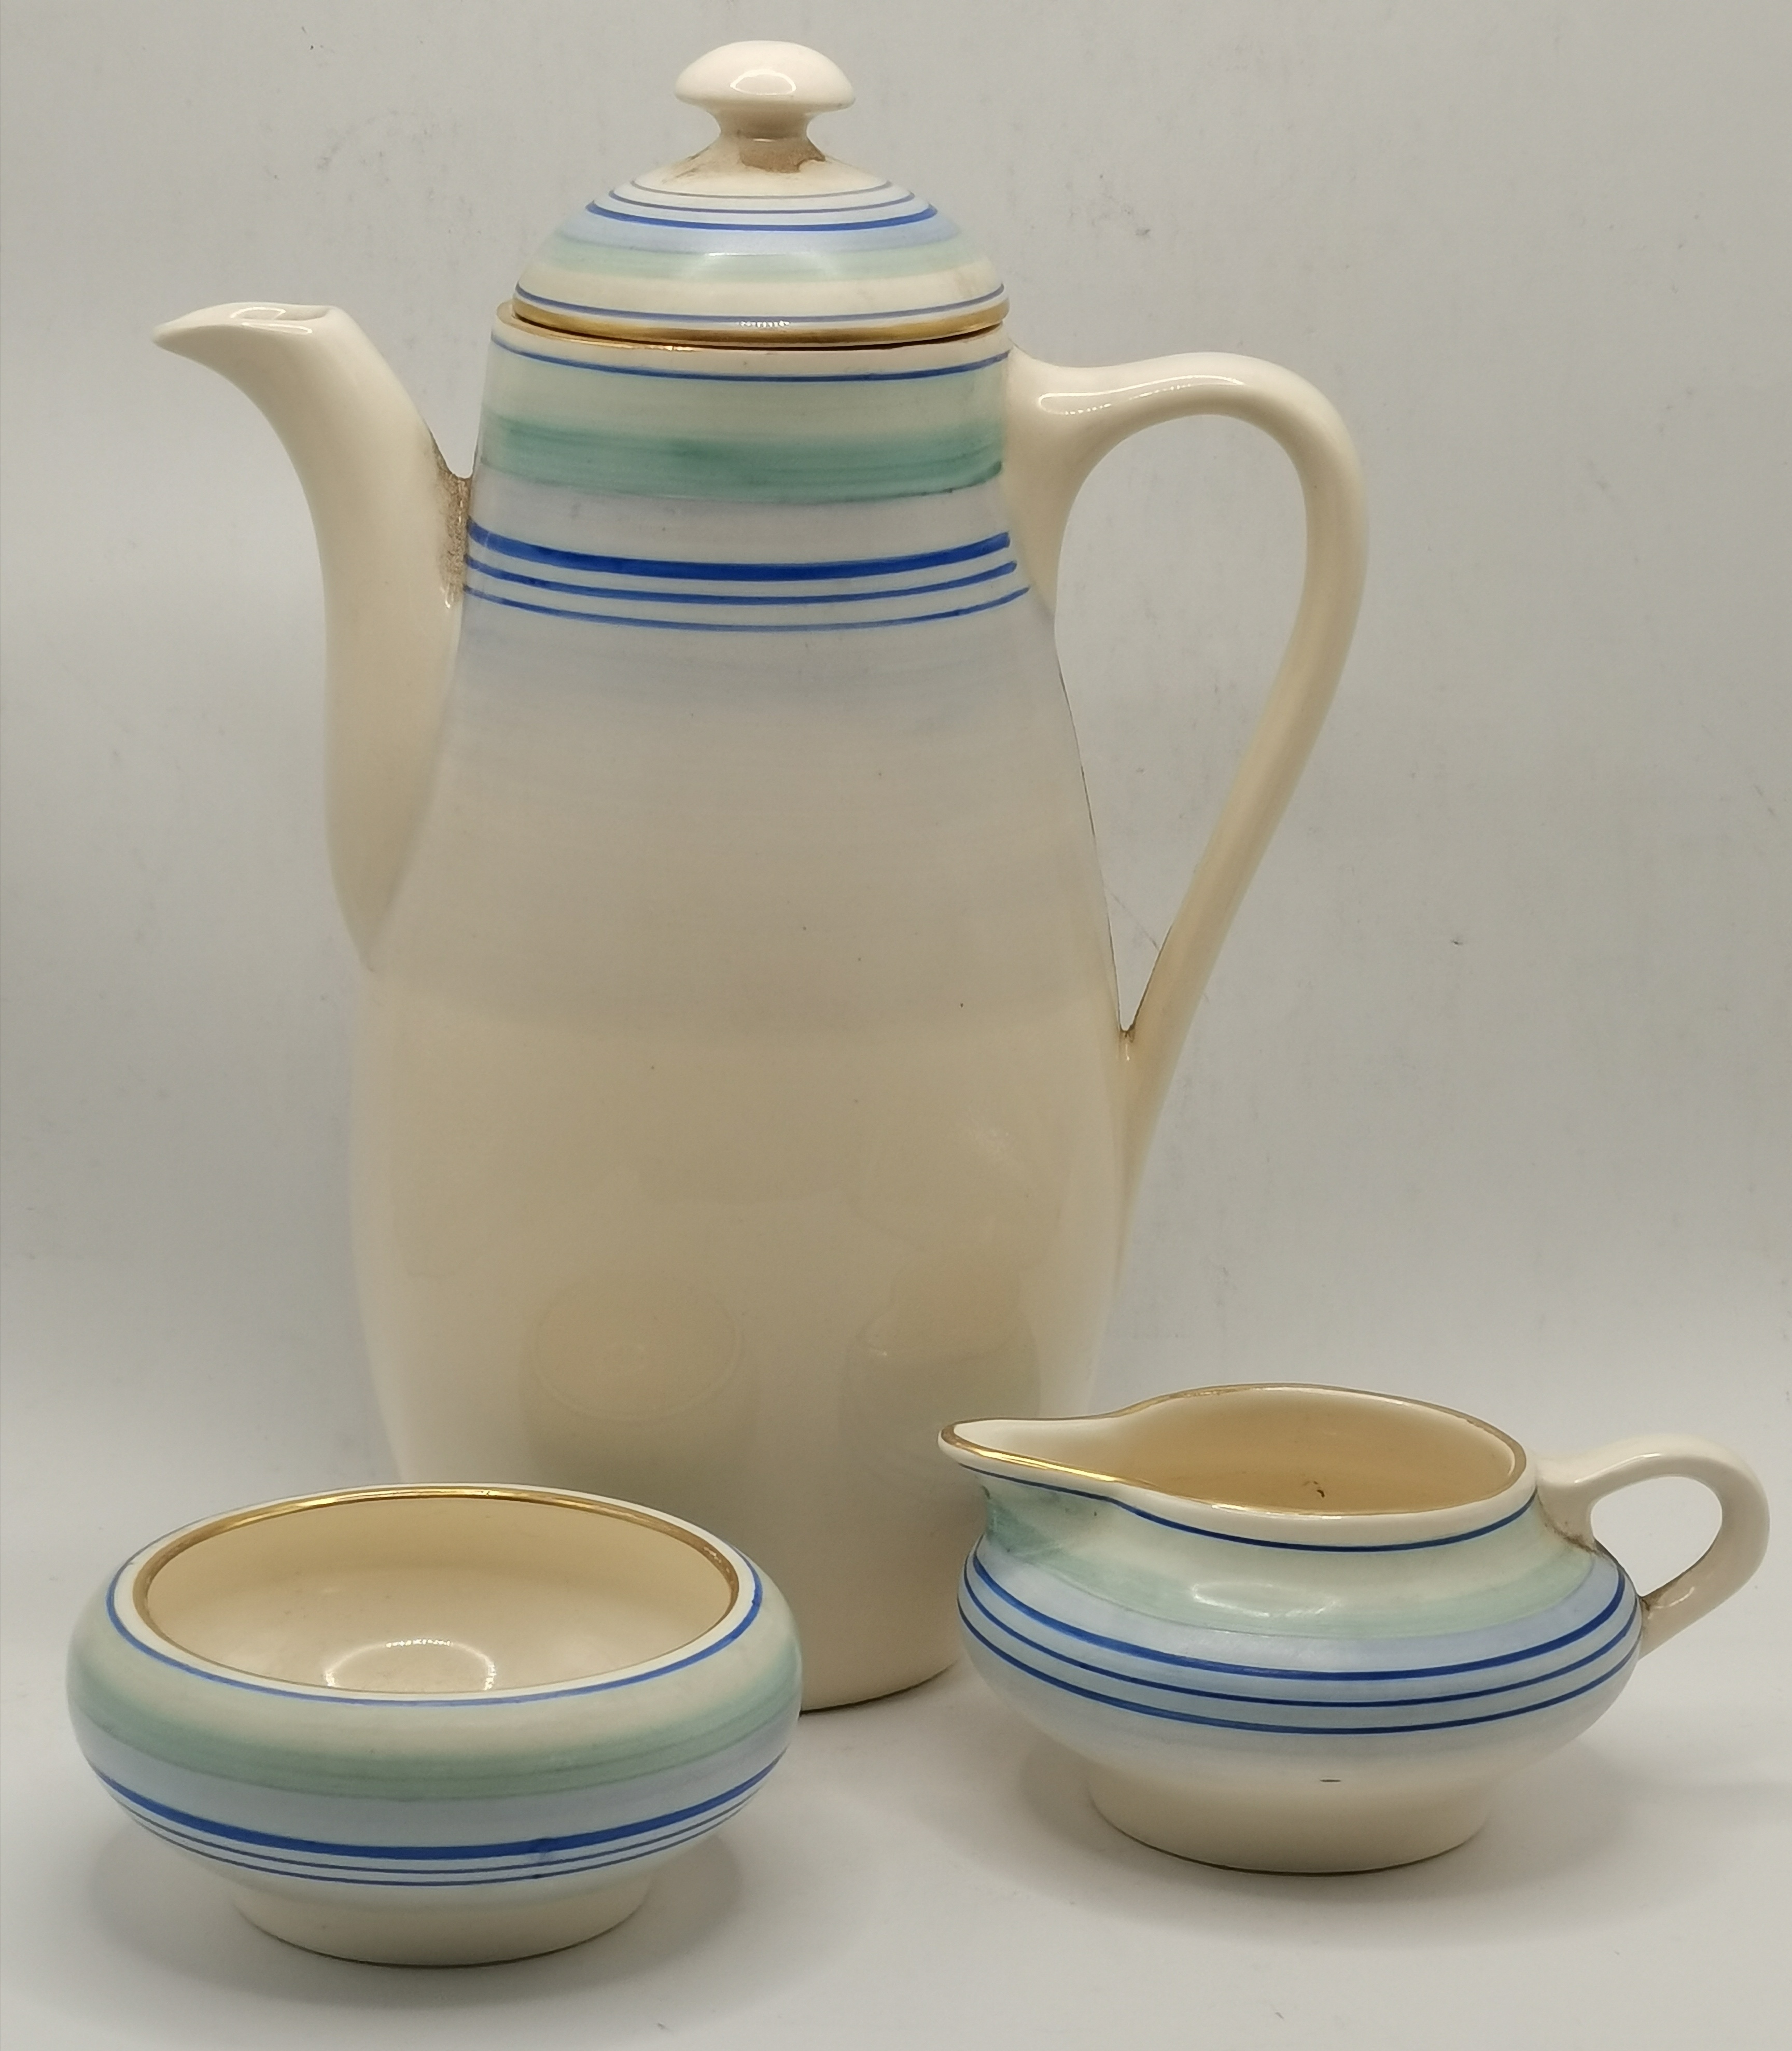 A Gray's Pottery coffee set, mid-1930s - Image 2 of 5